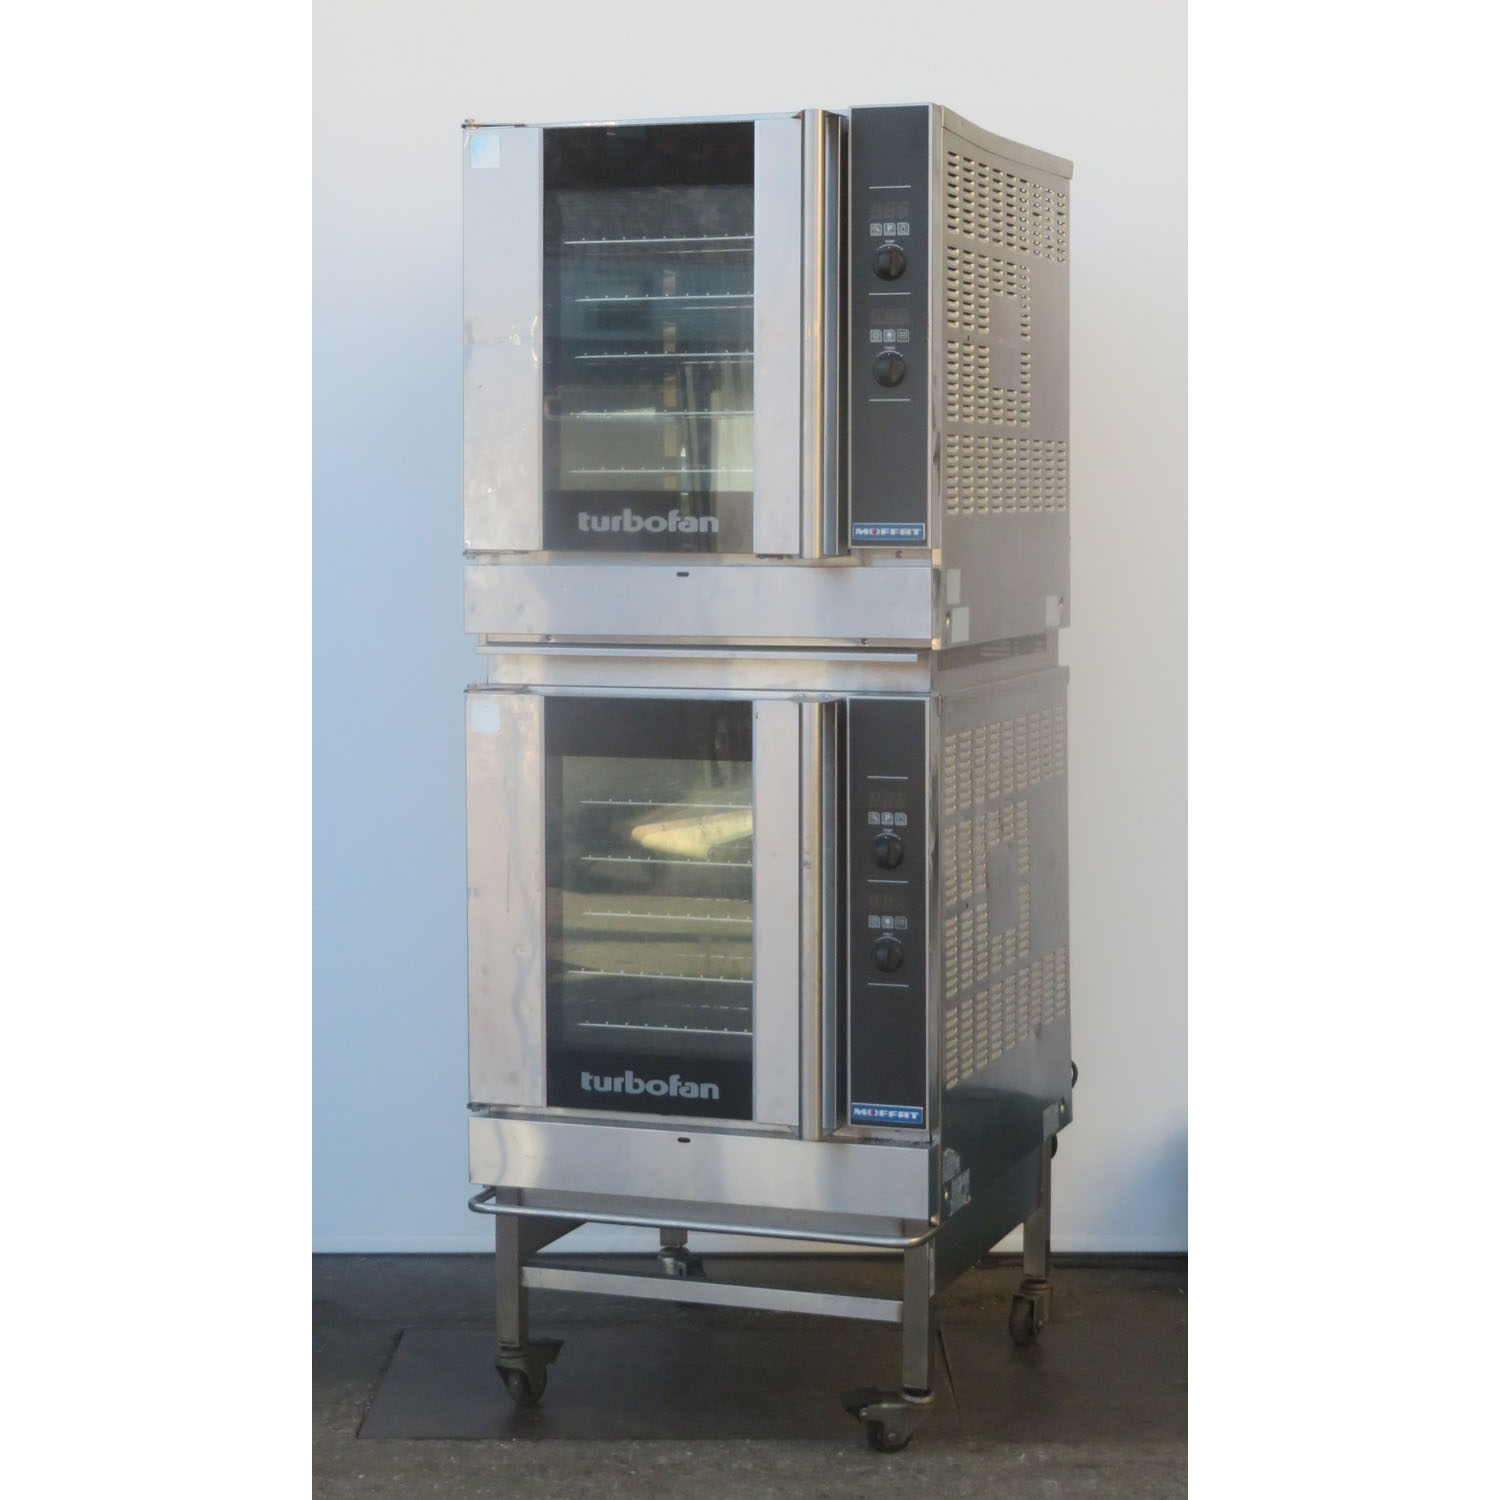 https://www.bakedeco.com/images/large/moffat_g32d5-2cn_double_gas_oven_used_excellent_co_64332.JPG